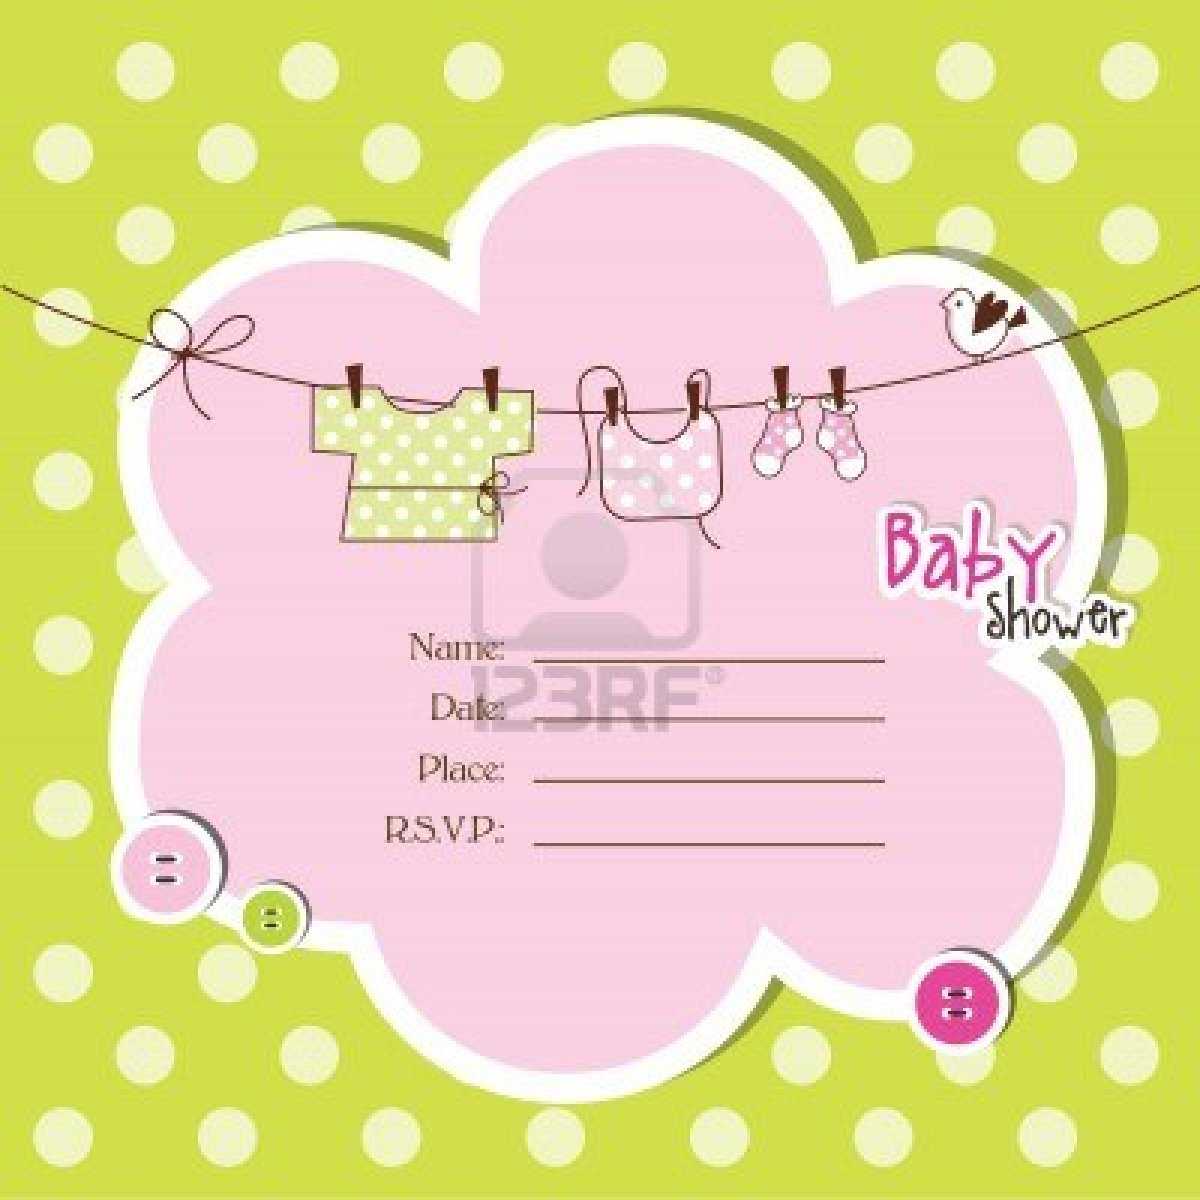 Free Baby Shower Invitations | Free Printable Baby Shower Inside Free Baby Shower Invitation Templates For Word